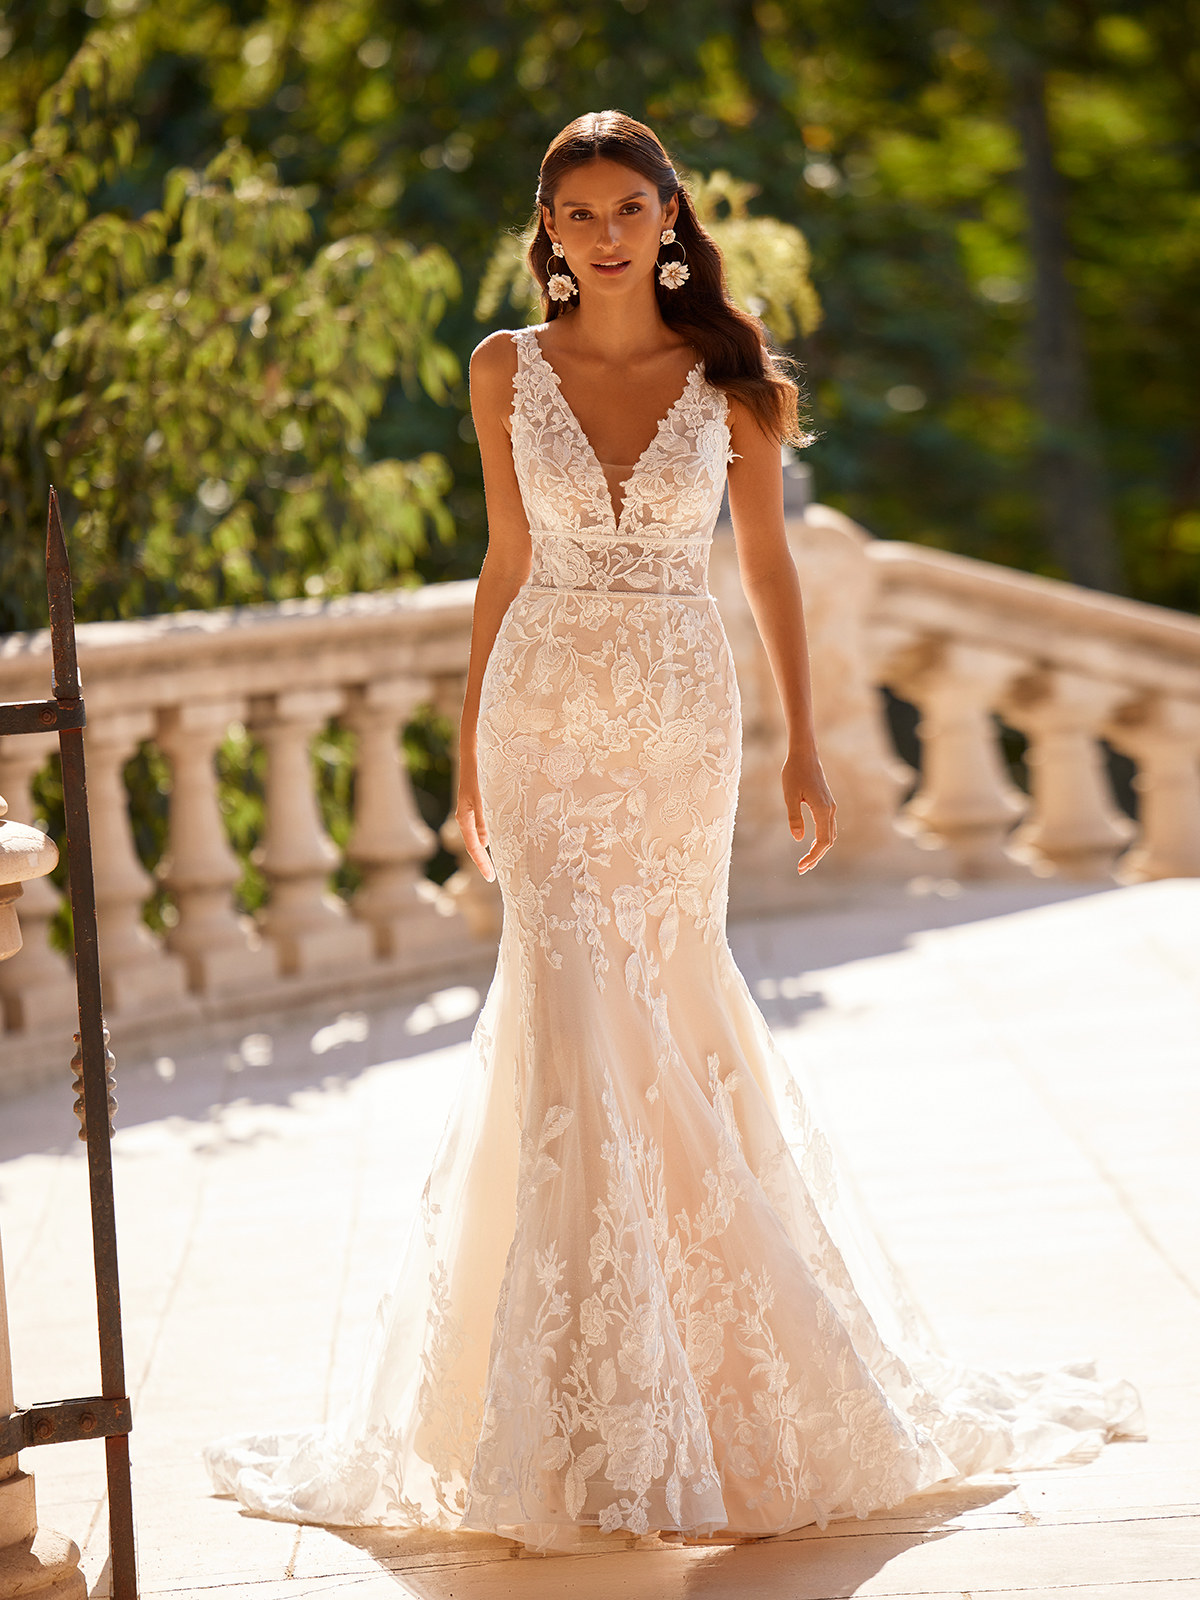 Wedding Dress Styles: How to Choose the Best Silhouette for your